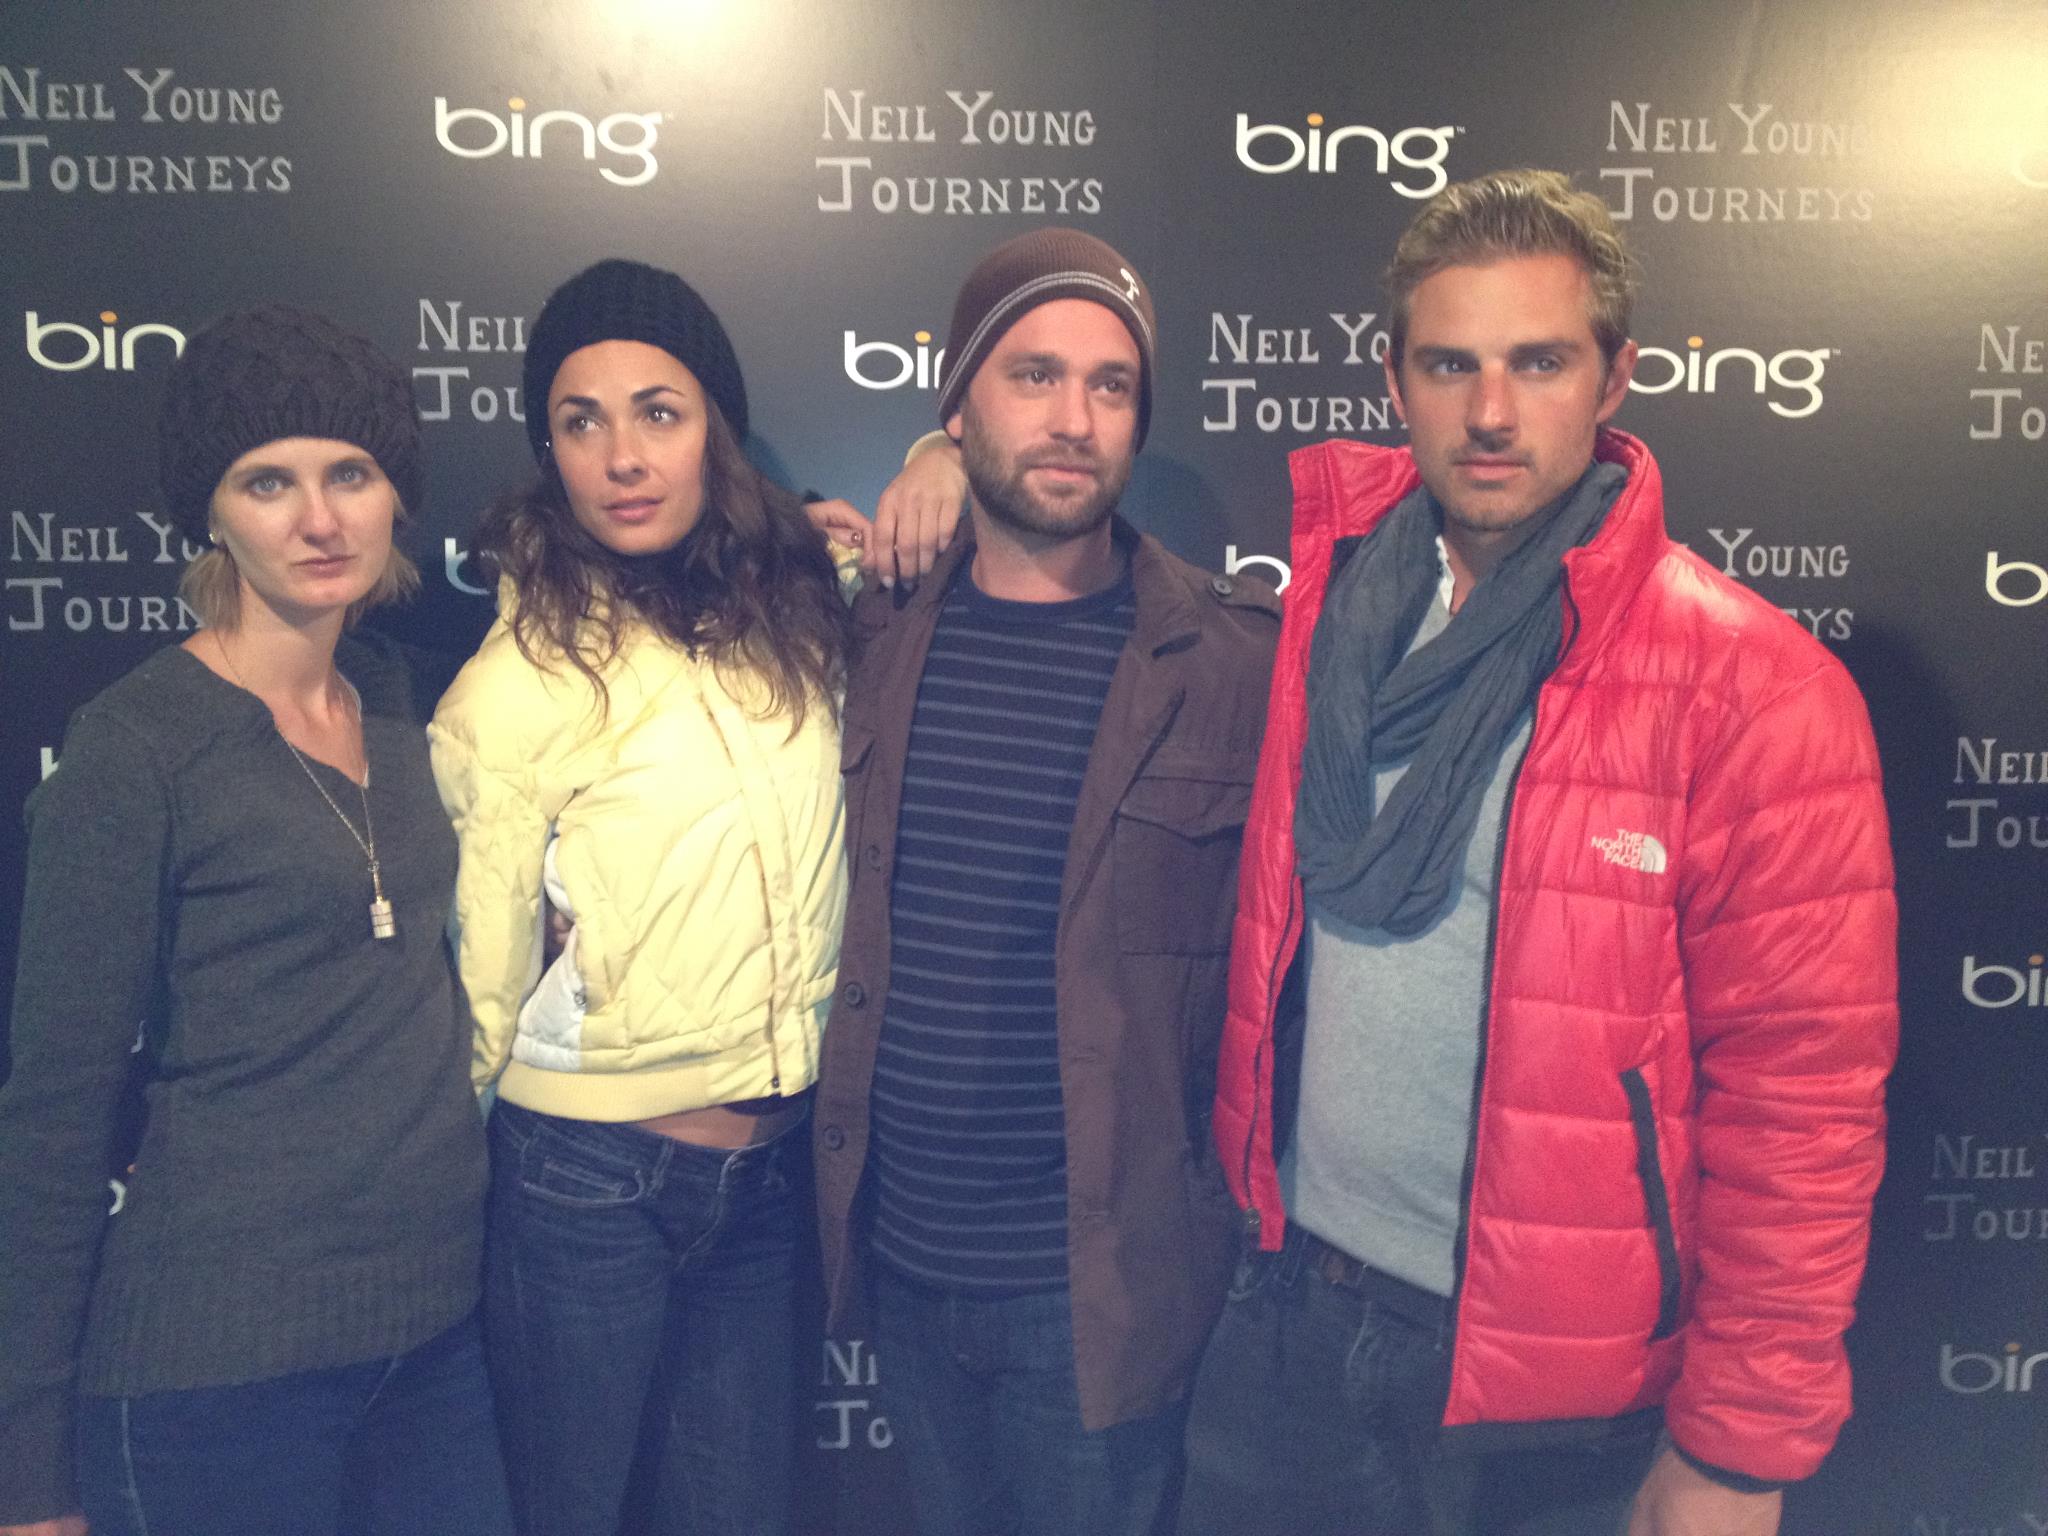 Neil Young Journeys Premiere at Slamdance, Park City with Megan Galizia, Ashely Walsh, Matthew von Manahan and Jeff Berg